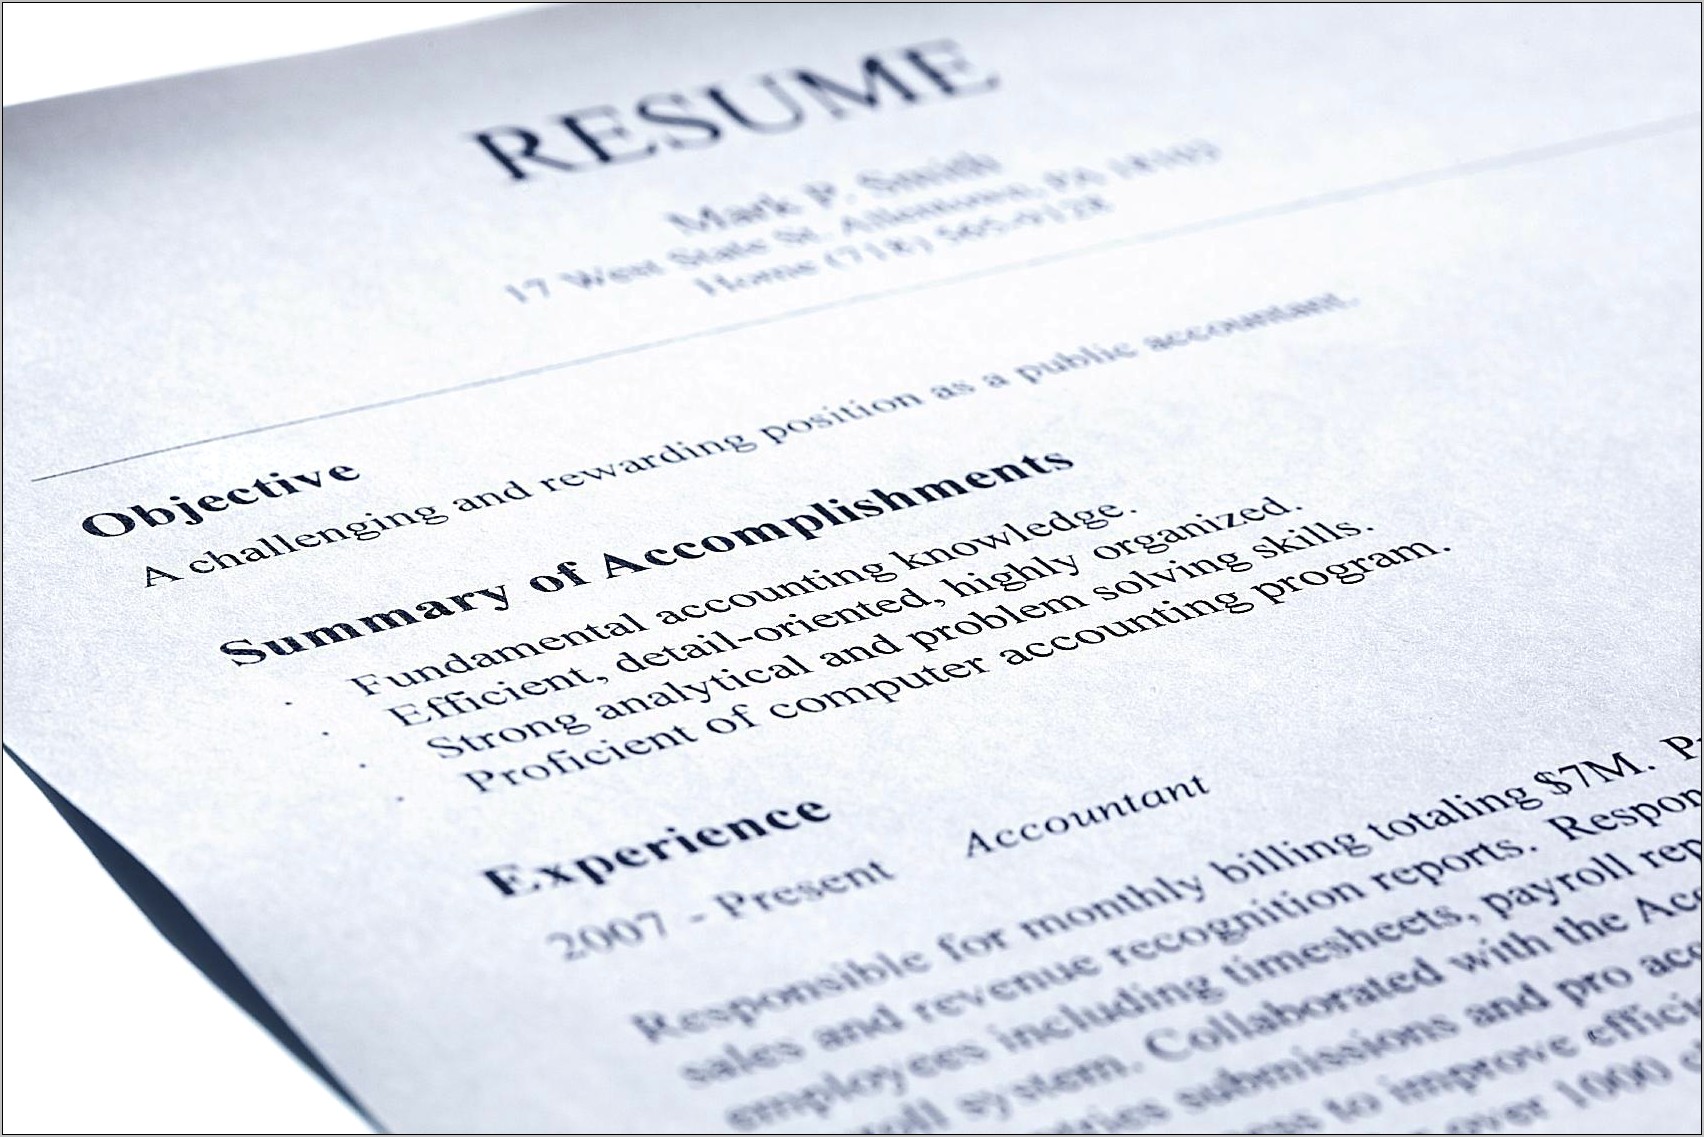 Is Problem Solving A Skill Resume